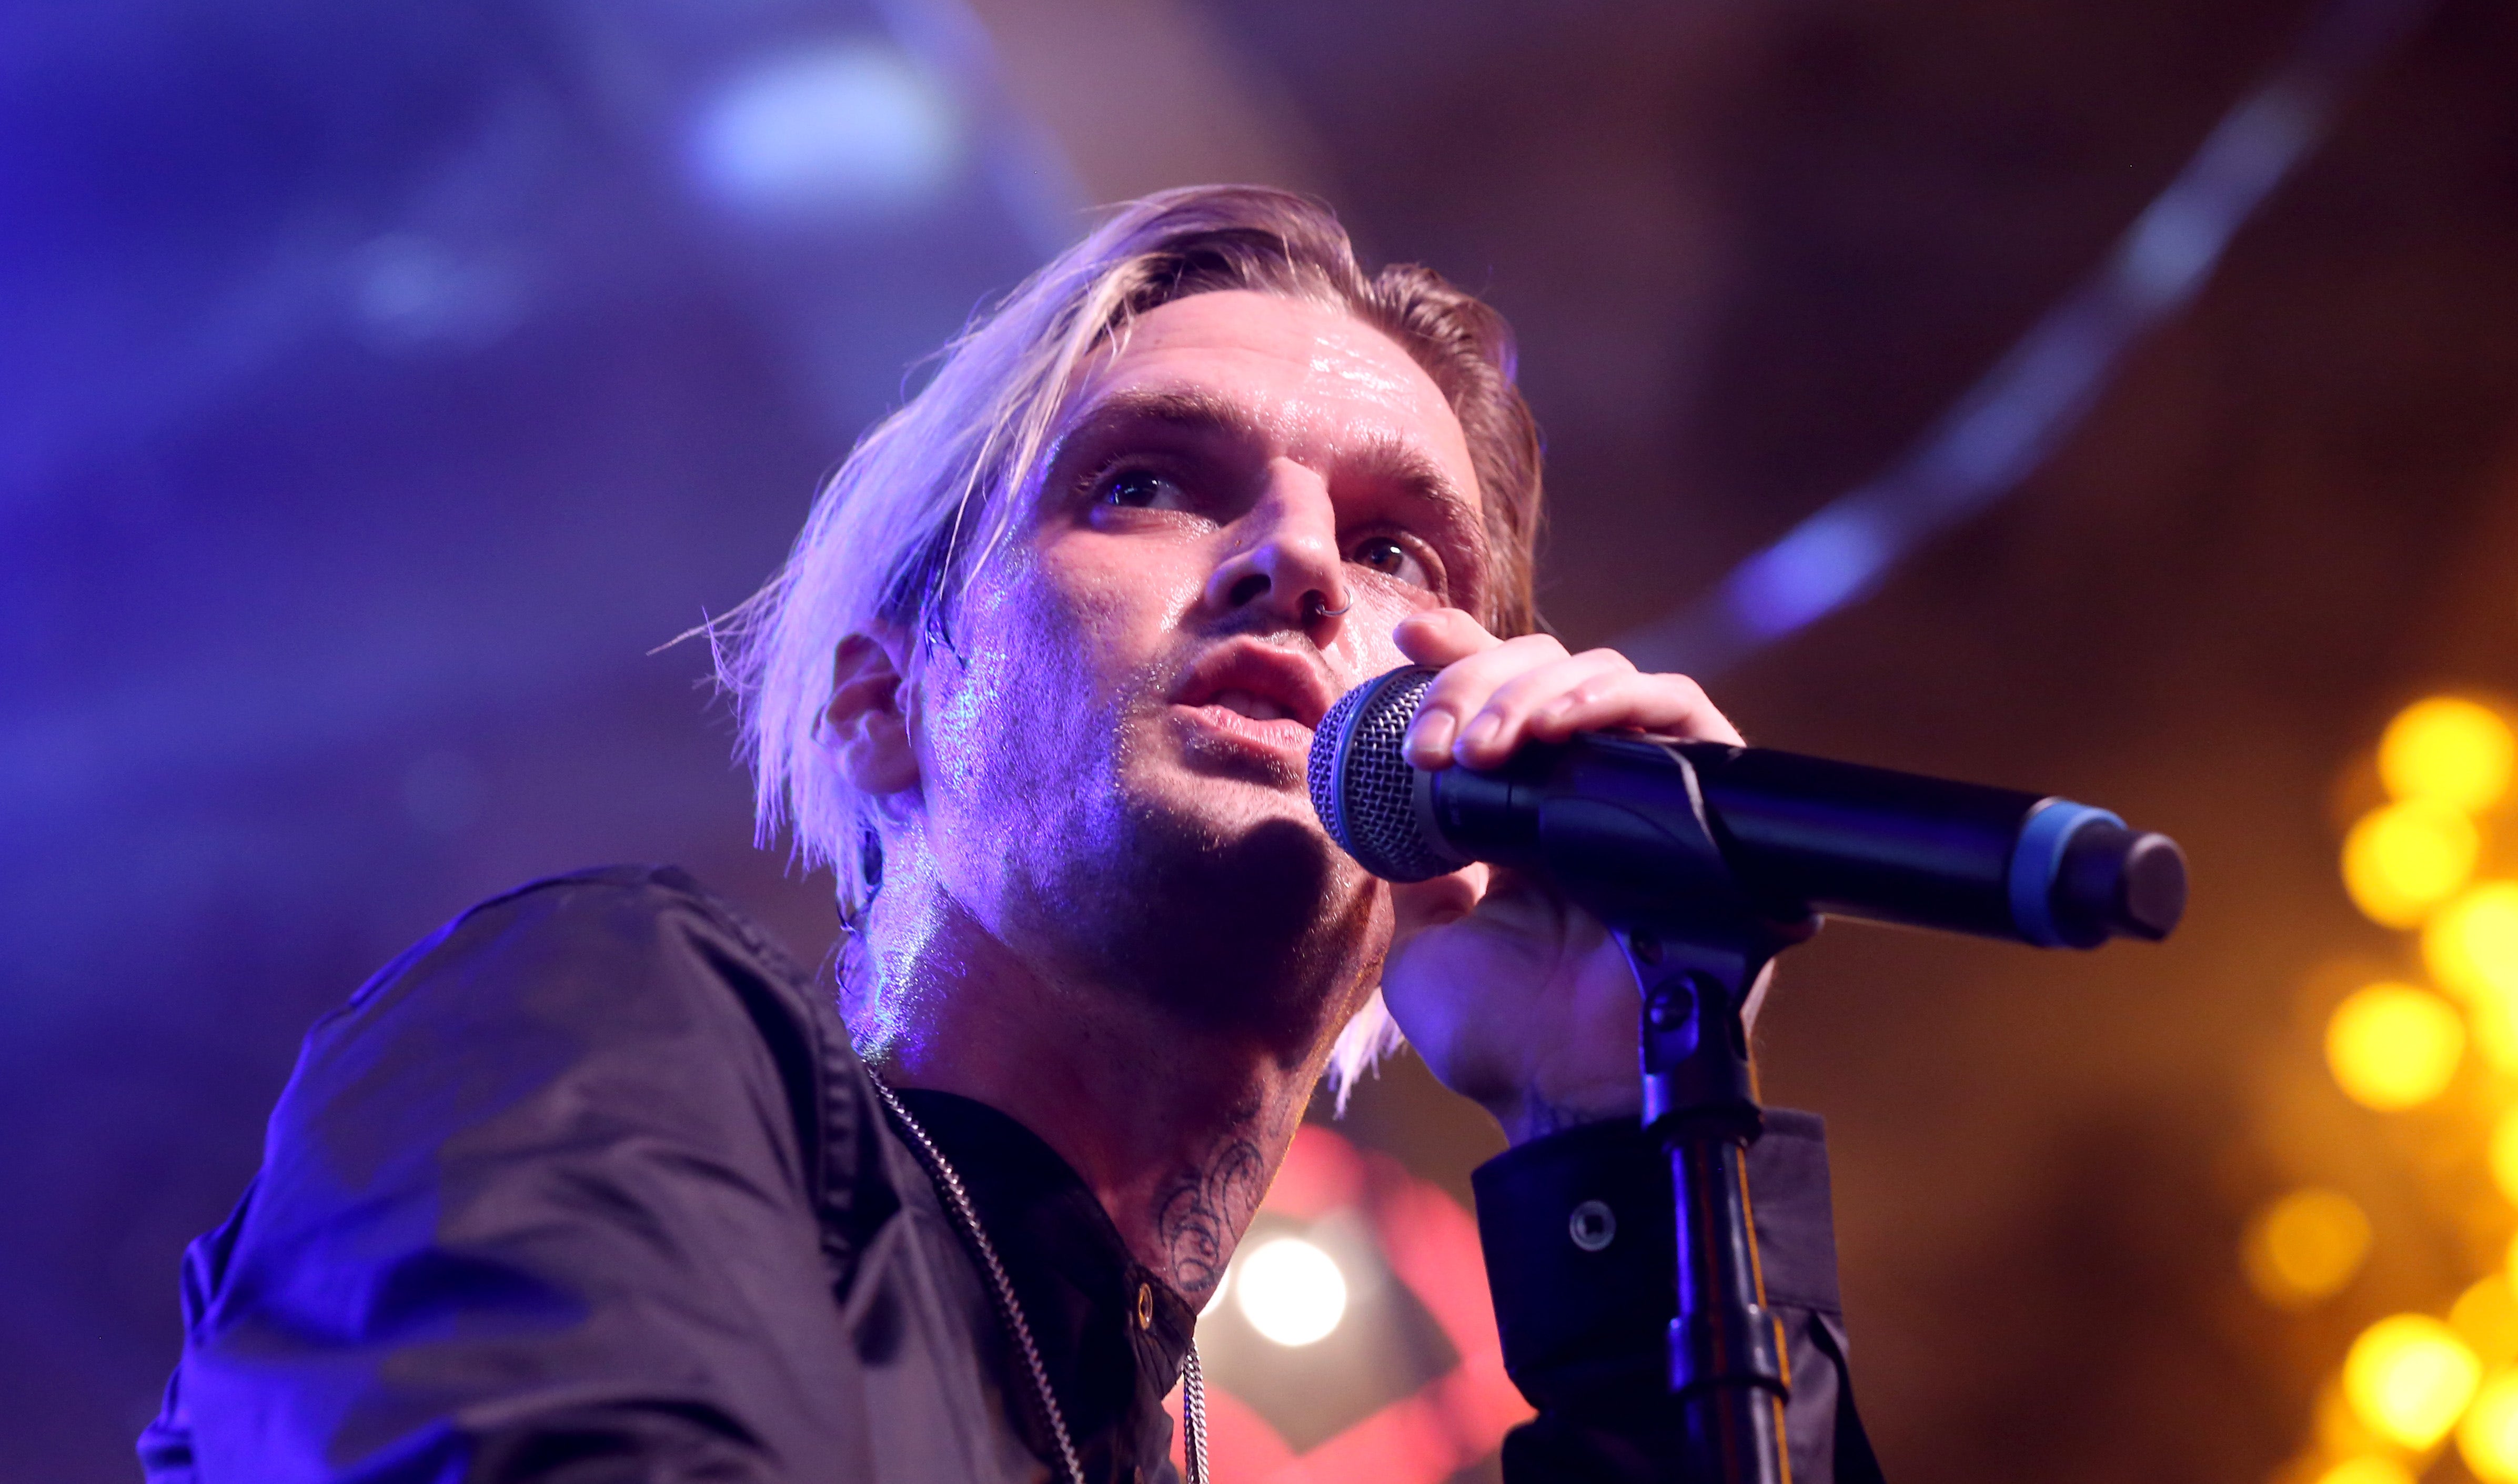 Aaron Carter’s fiancée speaks out as singer’s mom demands police investigation into son's death